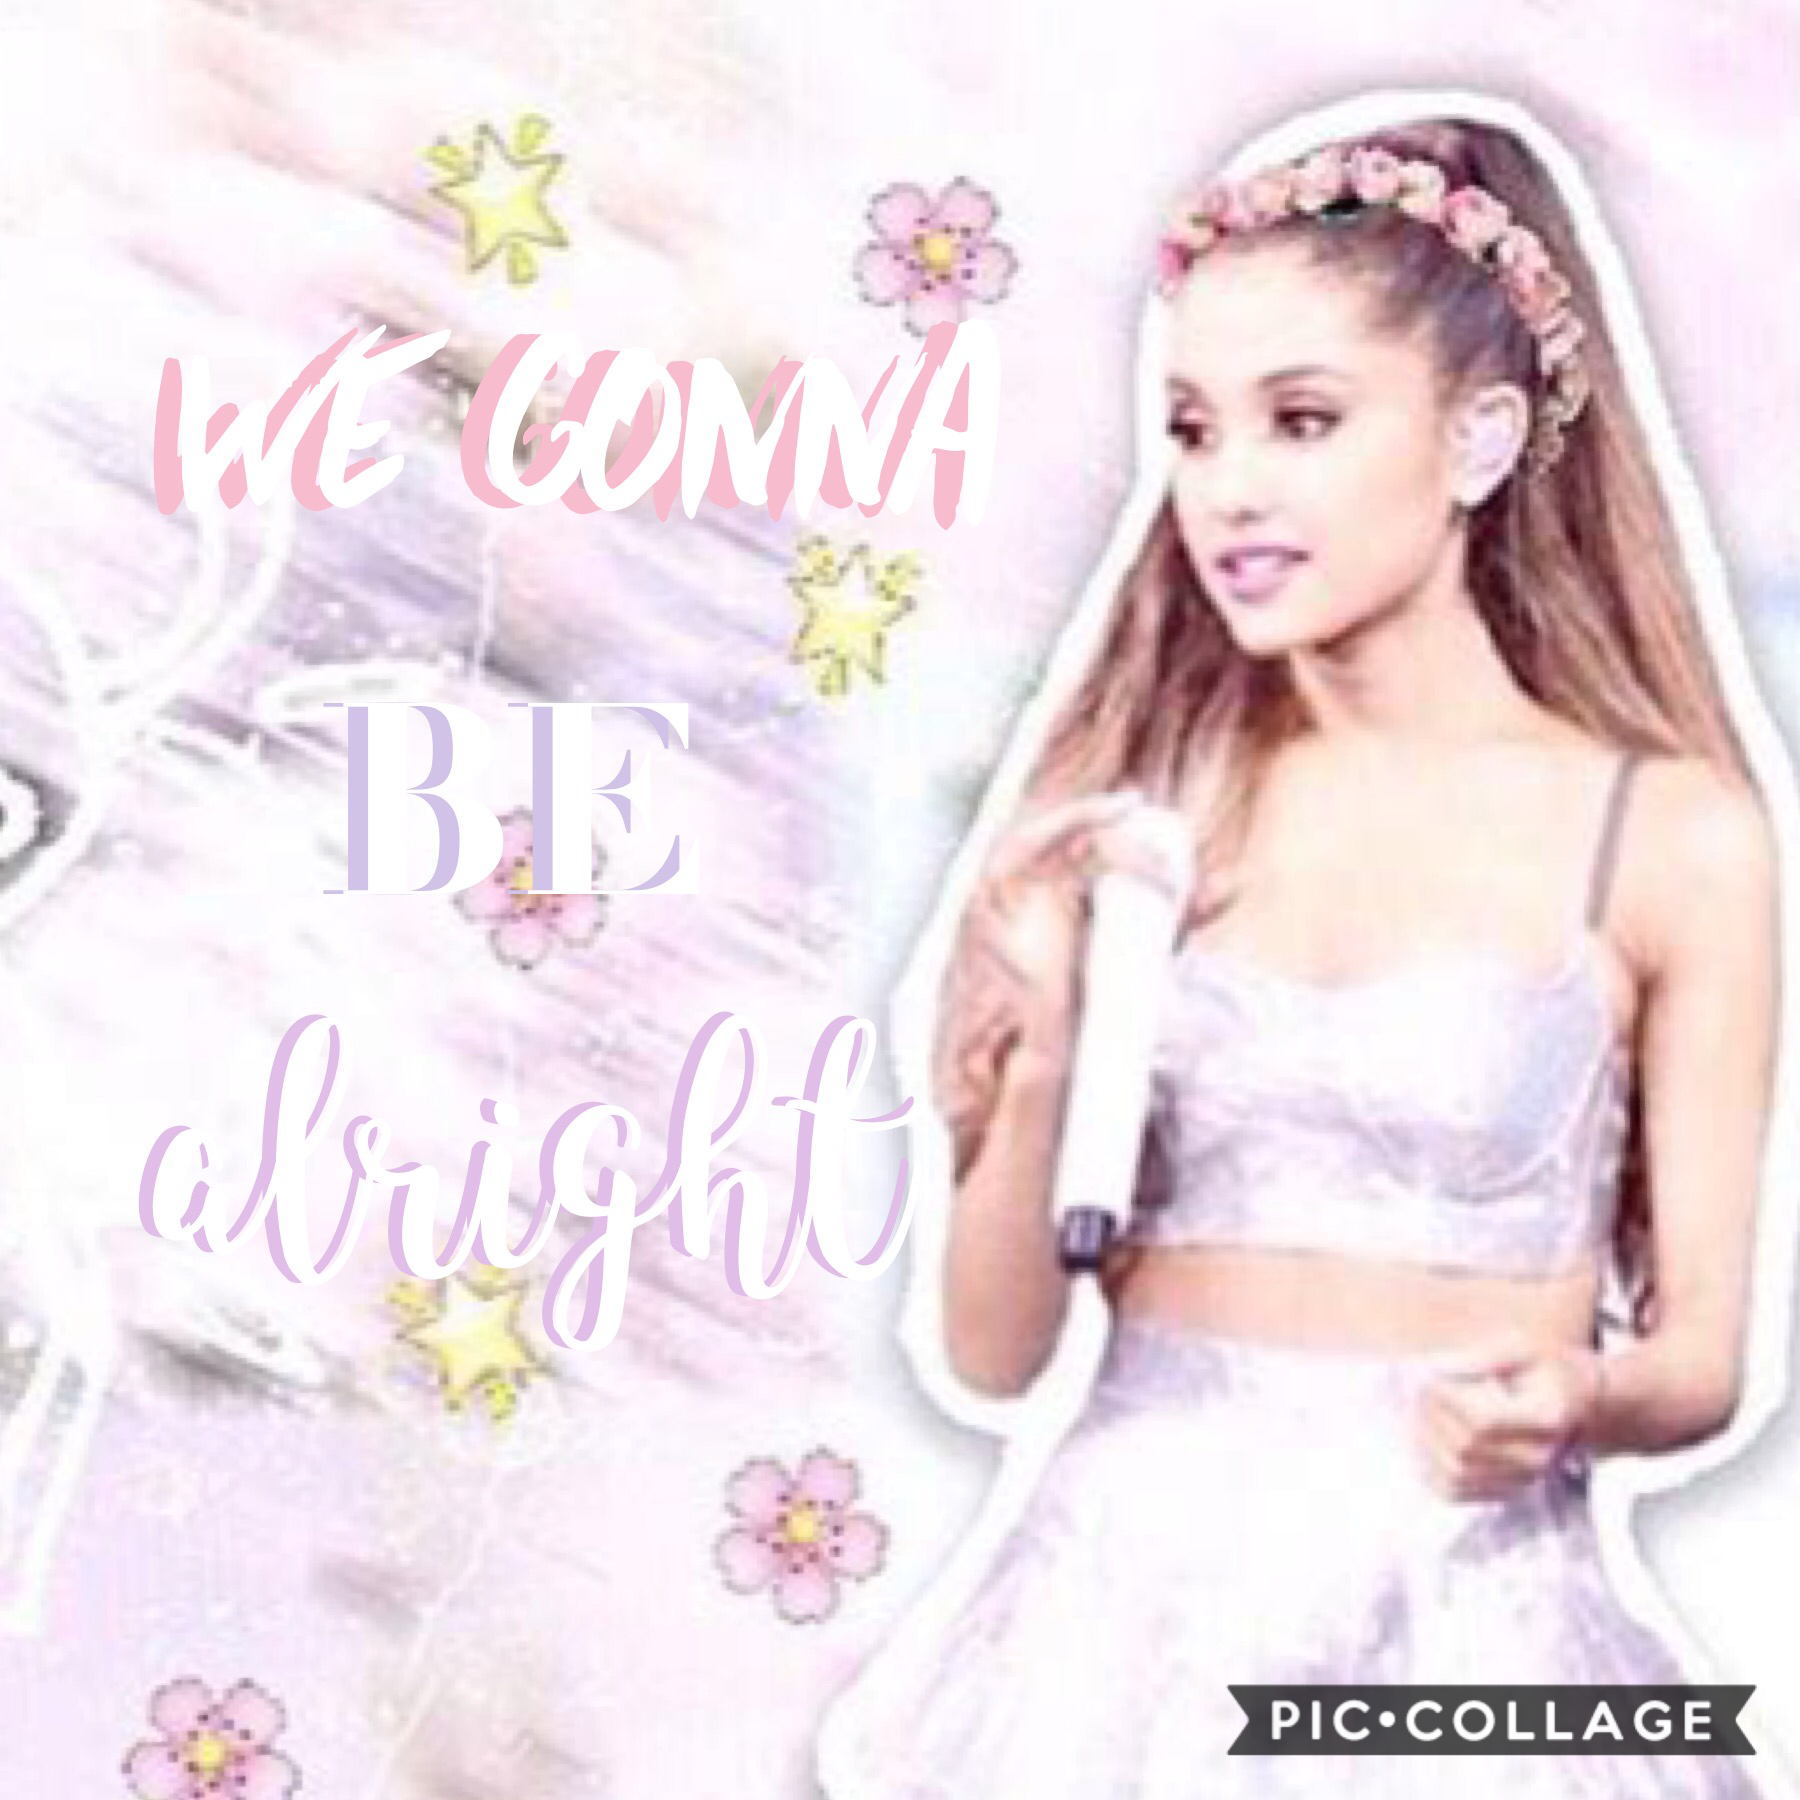 🌸tap🌸 

Idk how this turned out rate it from 1-10 🌸